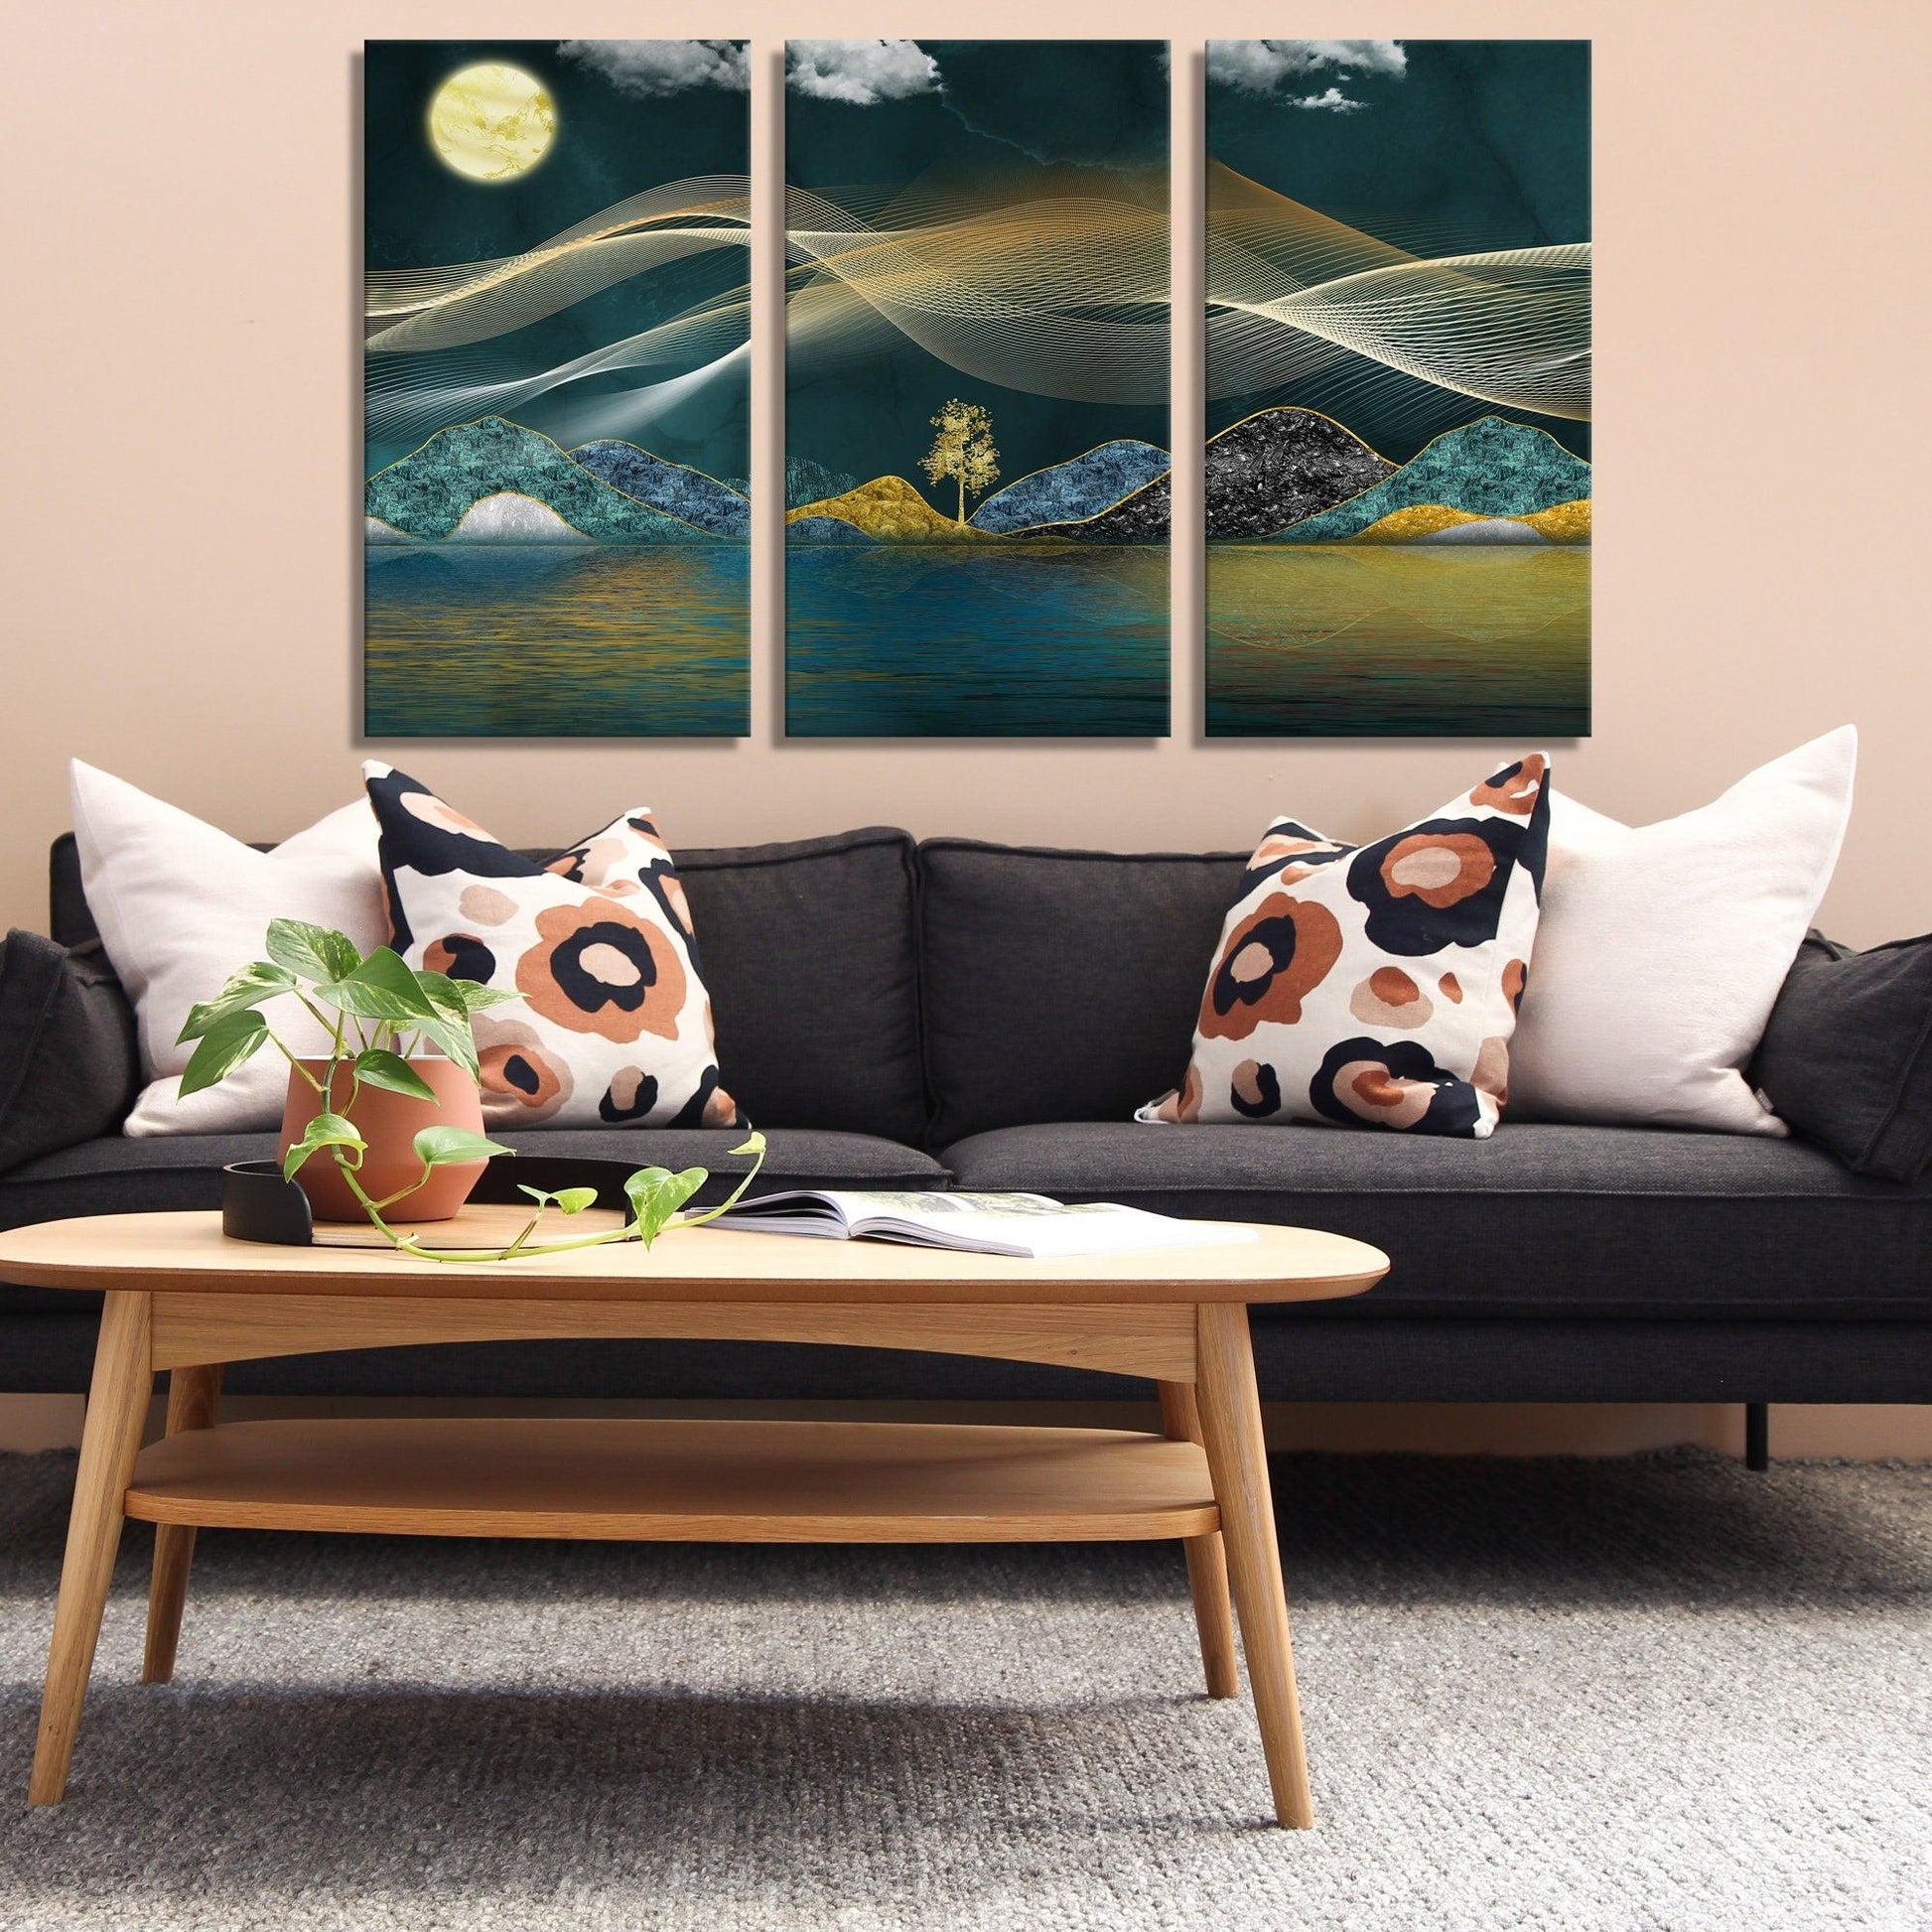 3 Piece sun and moon wall art|  sun and moon wall art, Modern Home Artwork, Sunrise Landscapes canvas wall art, Abstract Painting, Moon Sign